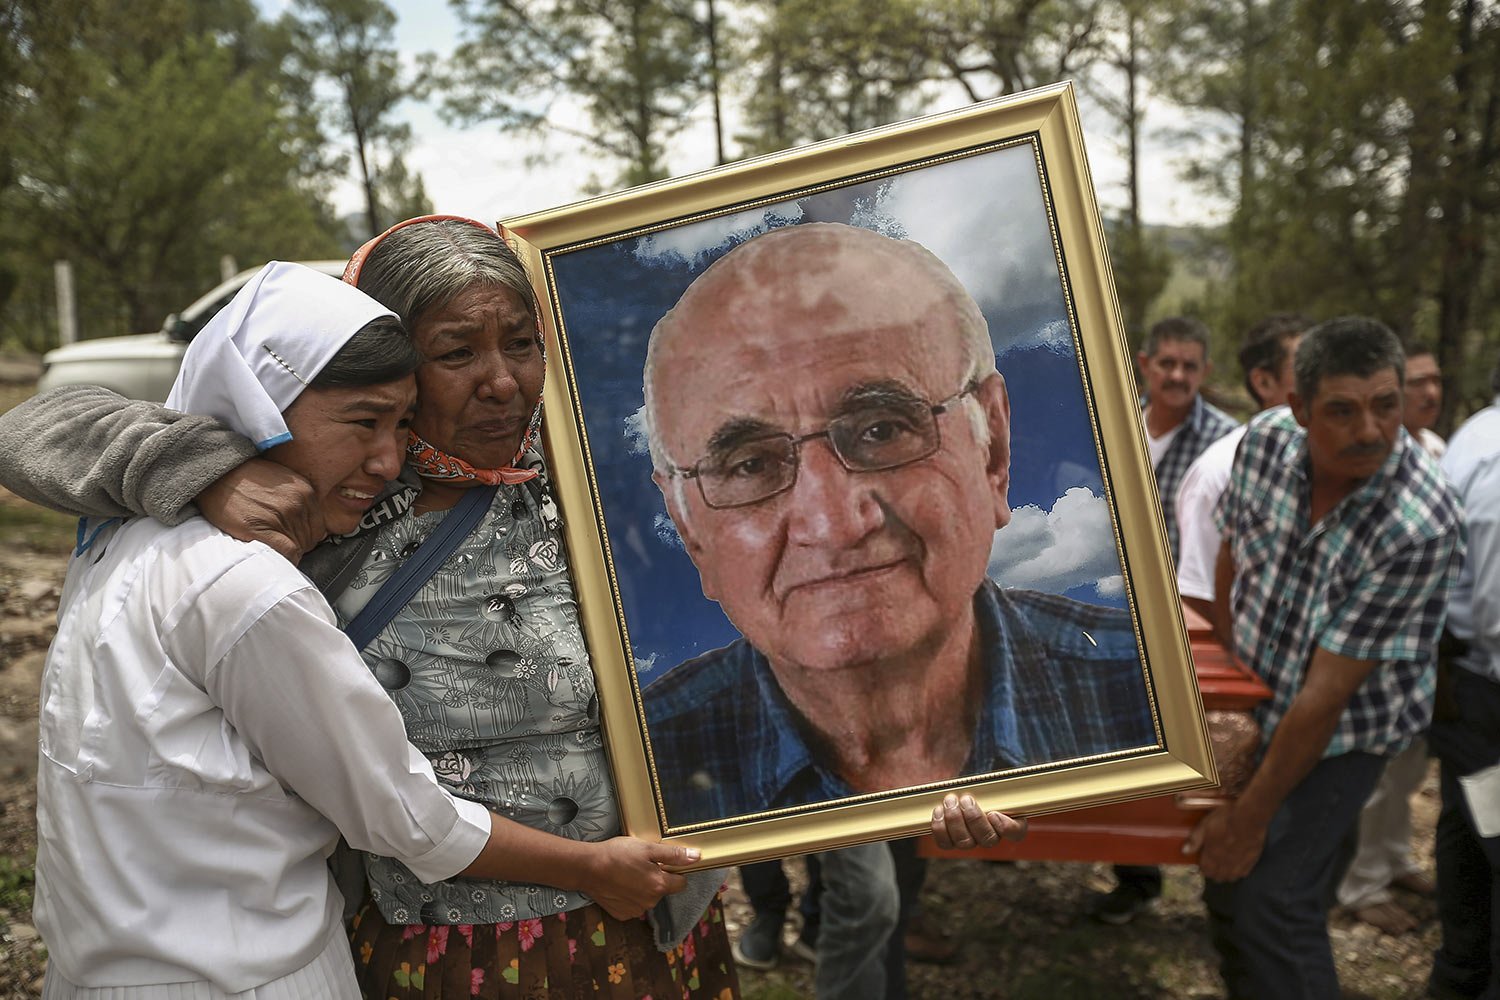  Women hold a portrait of Jesuit priest Javier Campos Morales as the funeral procession of Morales and fellow priest Joaquin Cesar Mora Salazar arrives to Cerocahui, Chihuahua state, Mexico, Sunday, June 26, 2022. The two elderly priests killed in th